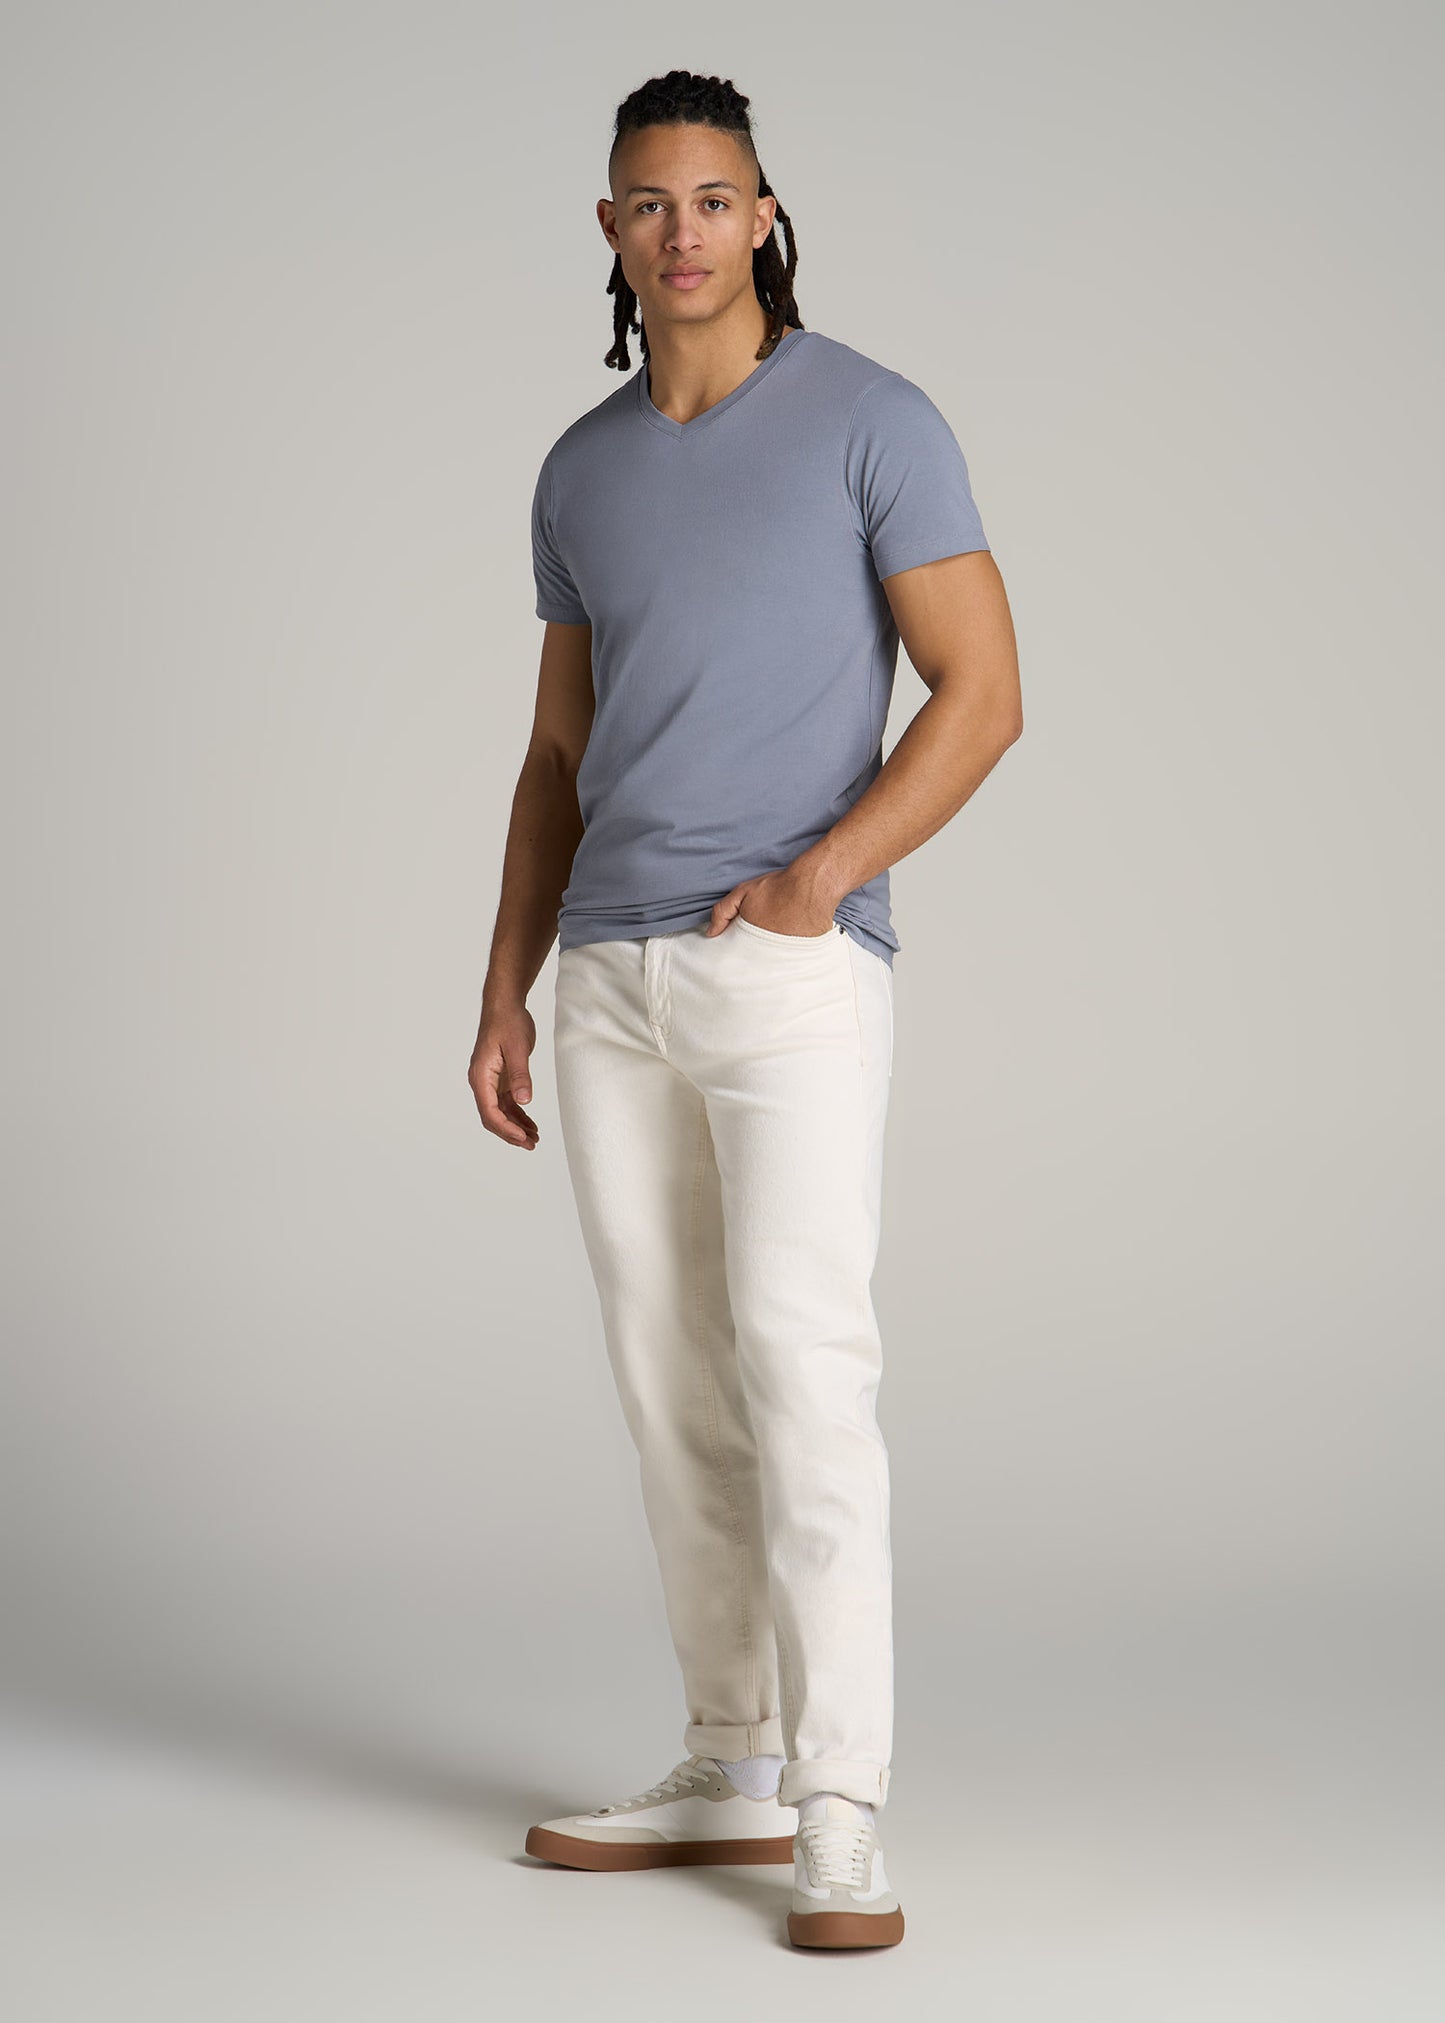 Stretch Cotton MODERN-FIT V-Neck T-Shirt for Tall Men in Skyline Grey